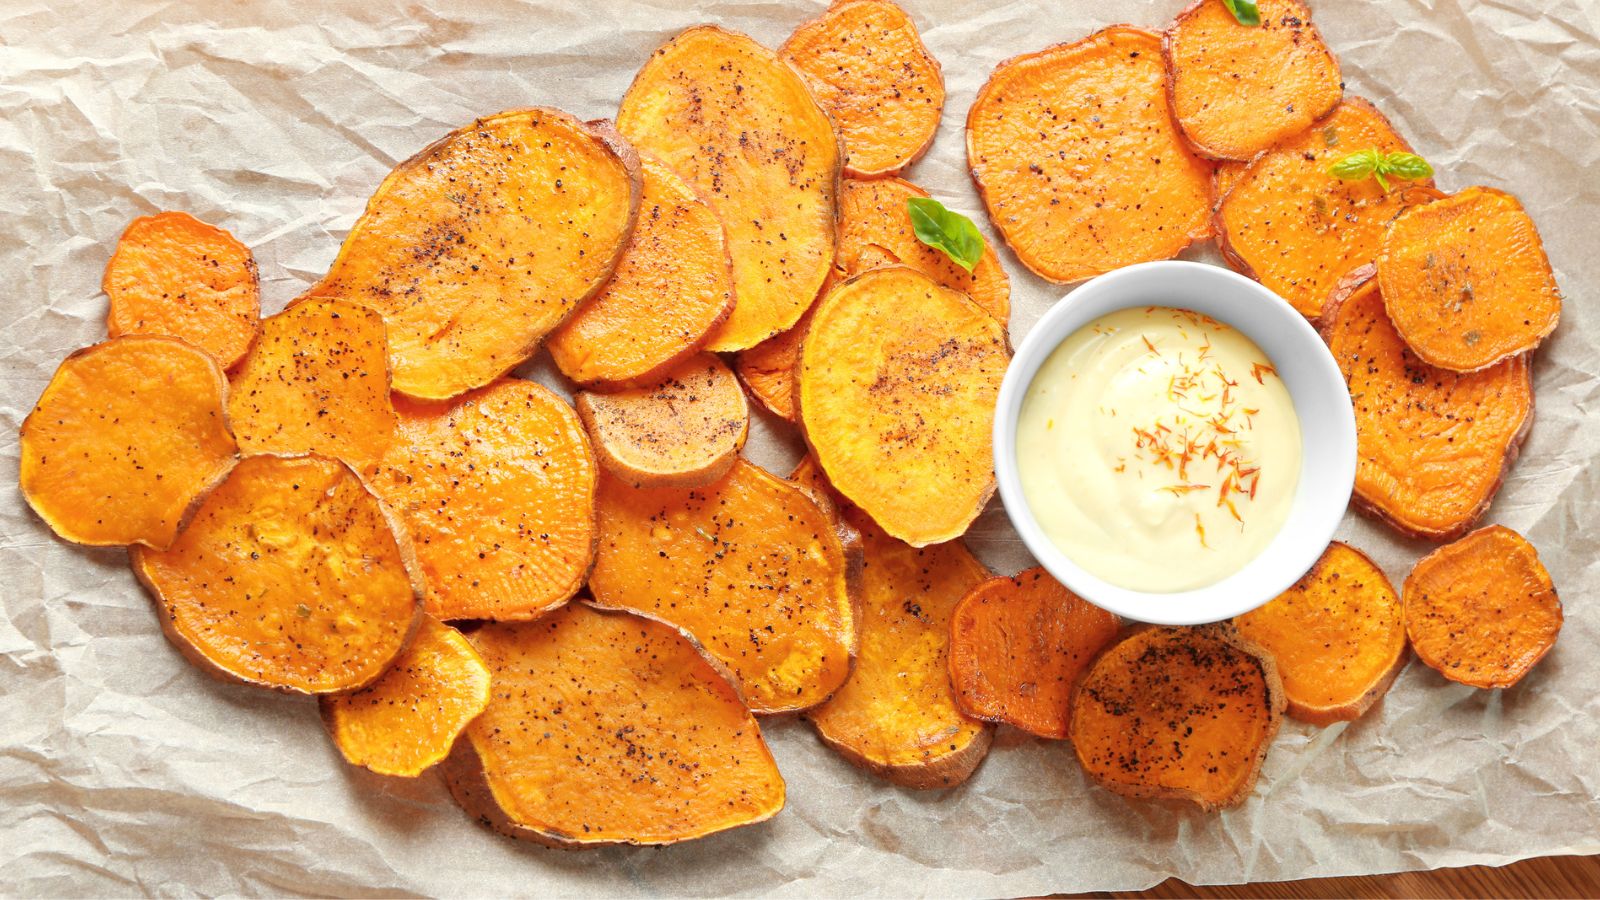 Experience the Warmth of Winter Spirit with these 22 Tempting Sweet Potato Recipes